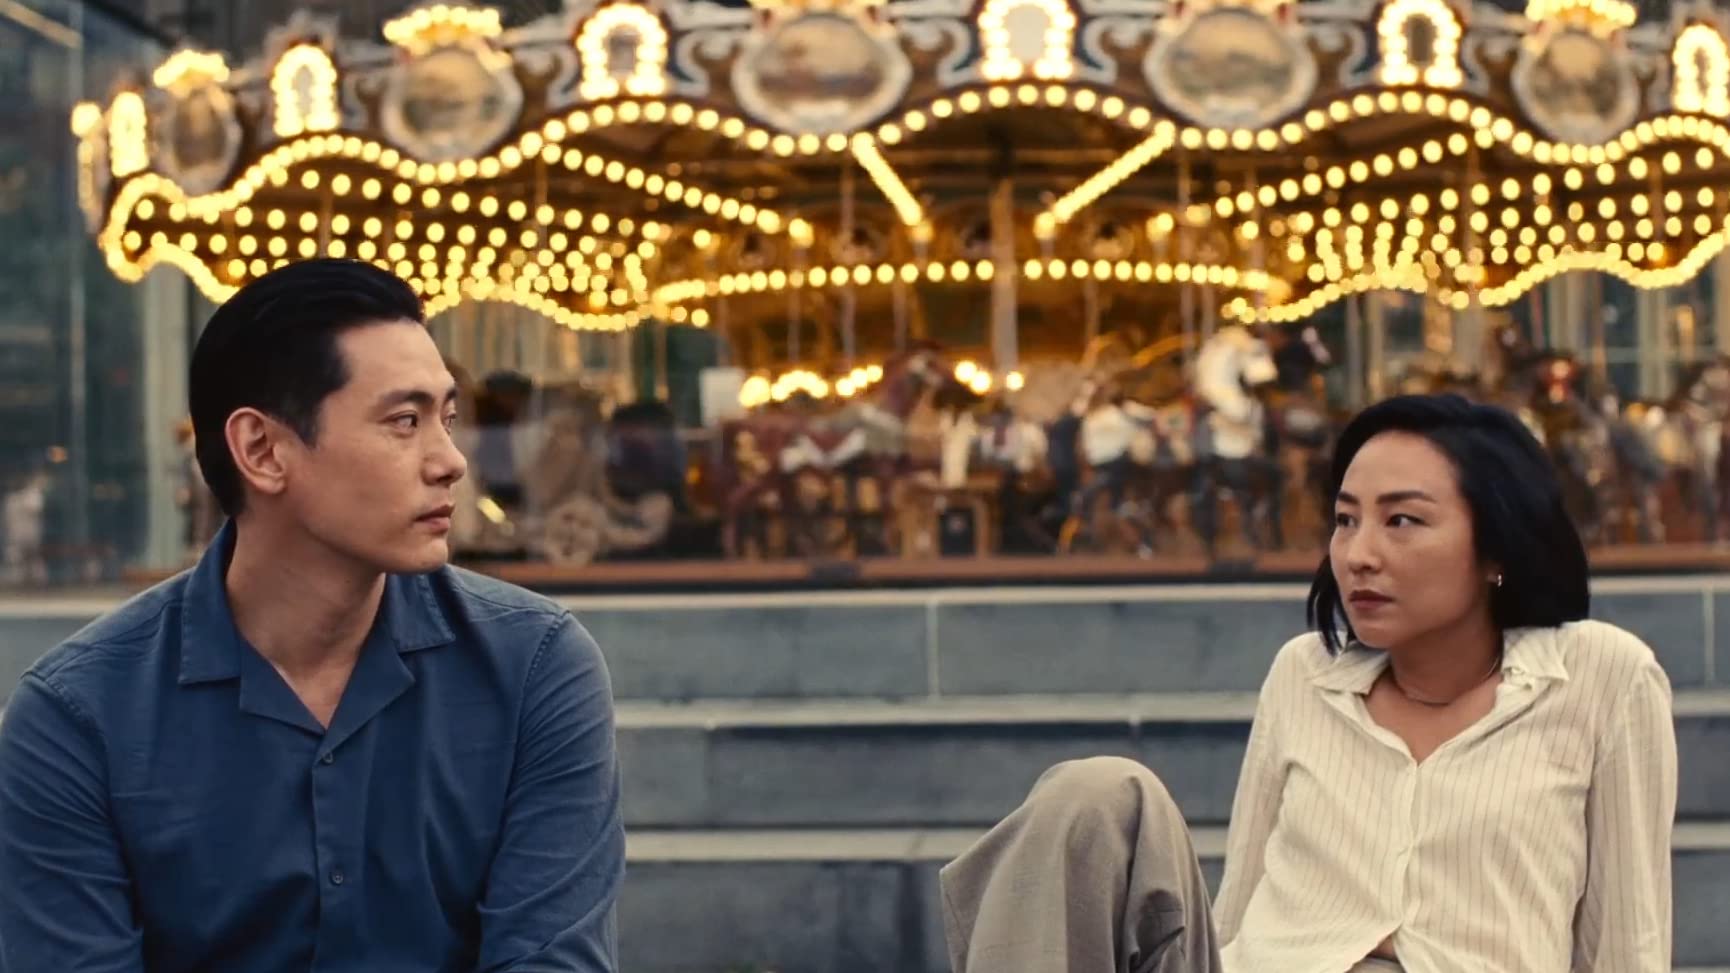 A Korean man and woman sit in front of a carousel blurred background with yellow lights. The woman is leaned back and they are looking at each other with subtle playful expressions.